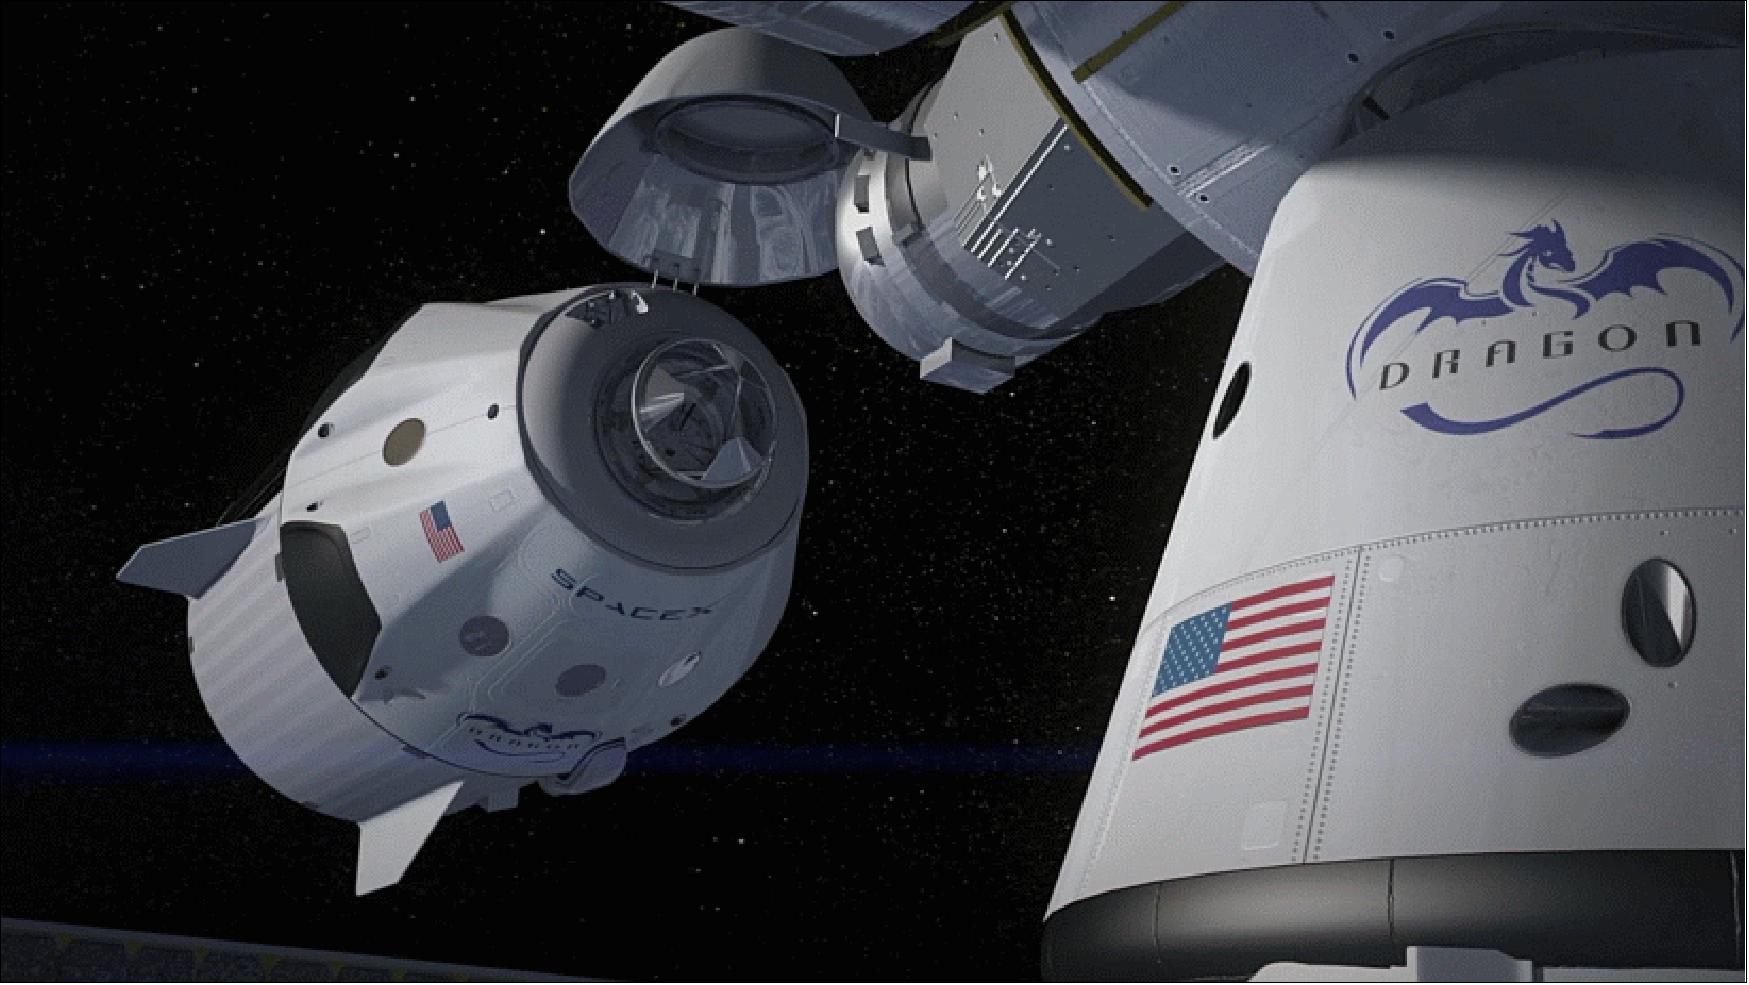 Figure 2: Animation of the SpaceX Dragon V2 docking with the ISS (image credit: SpaceX)